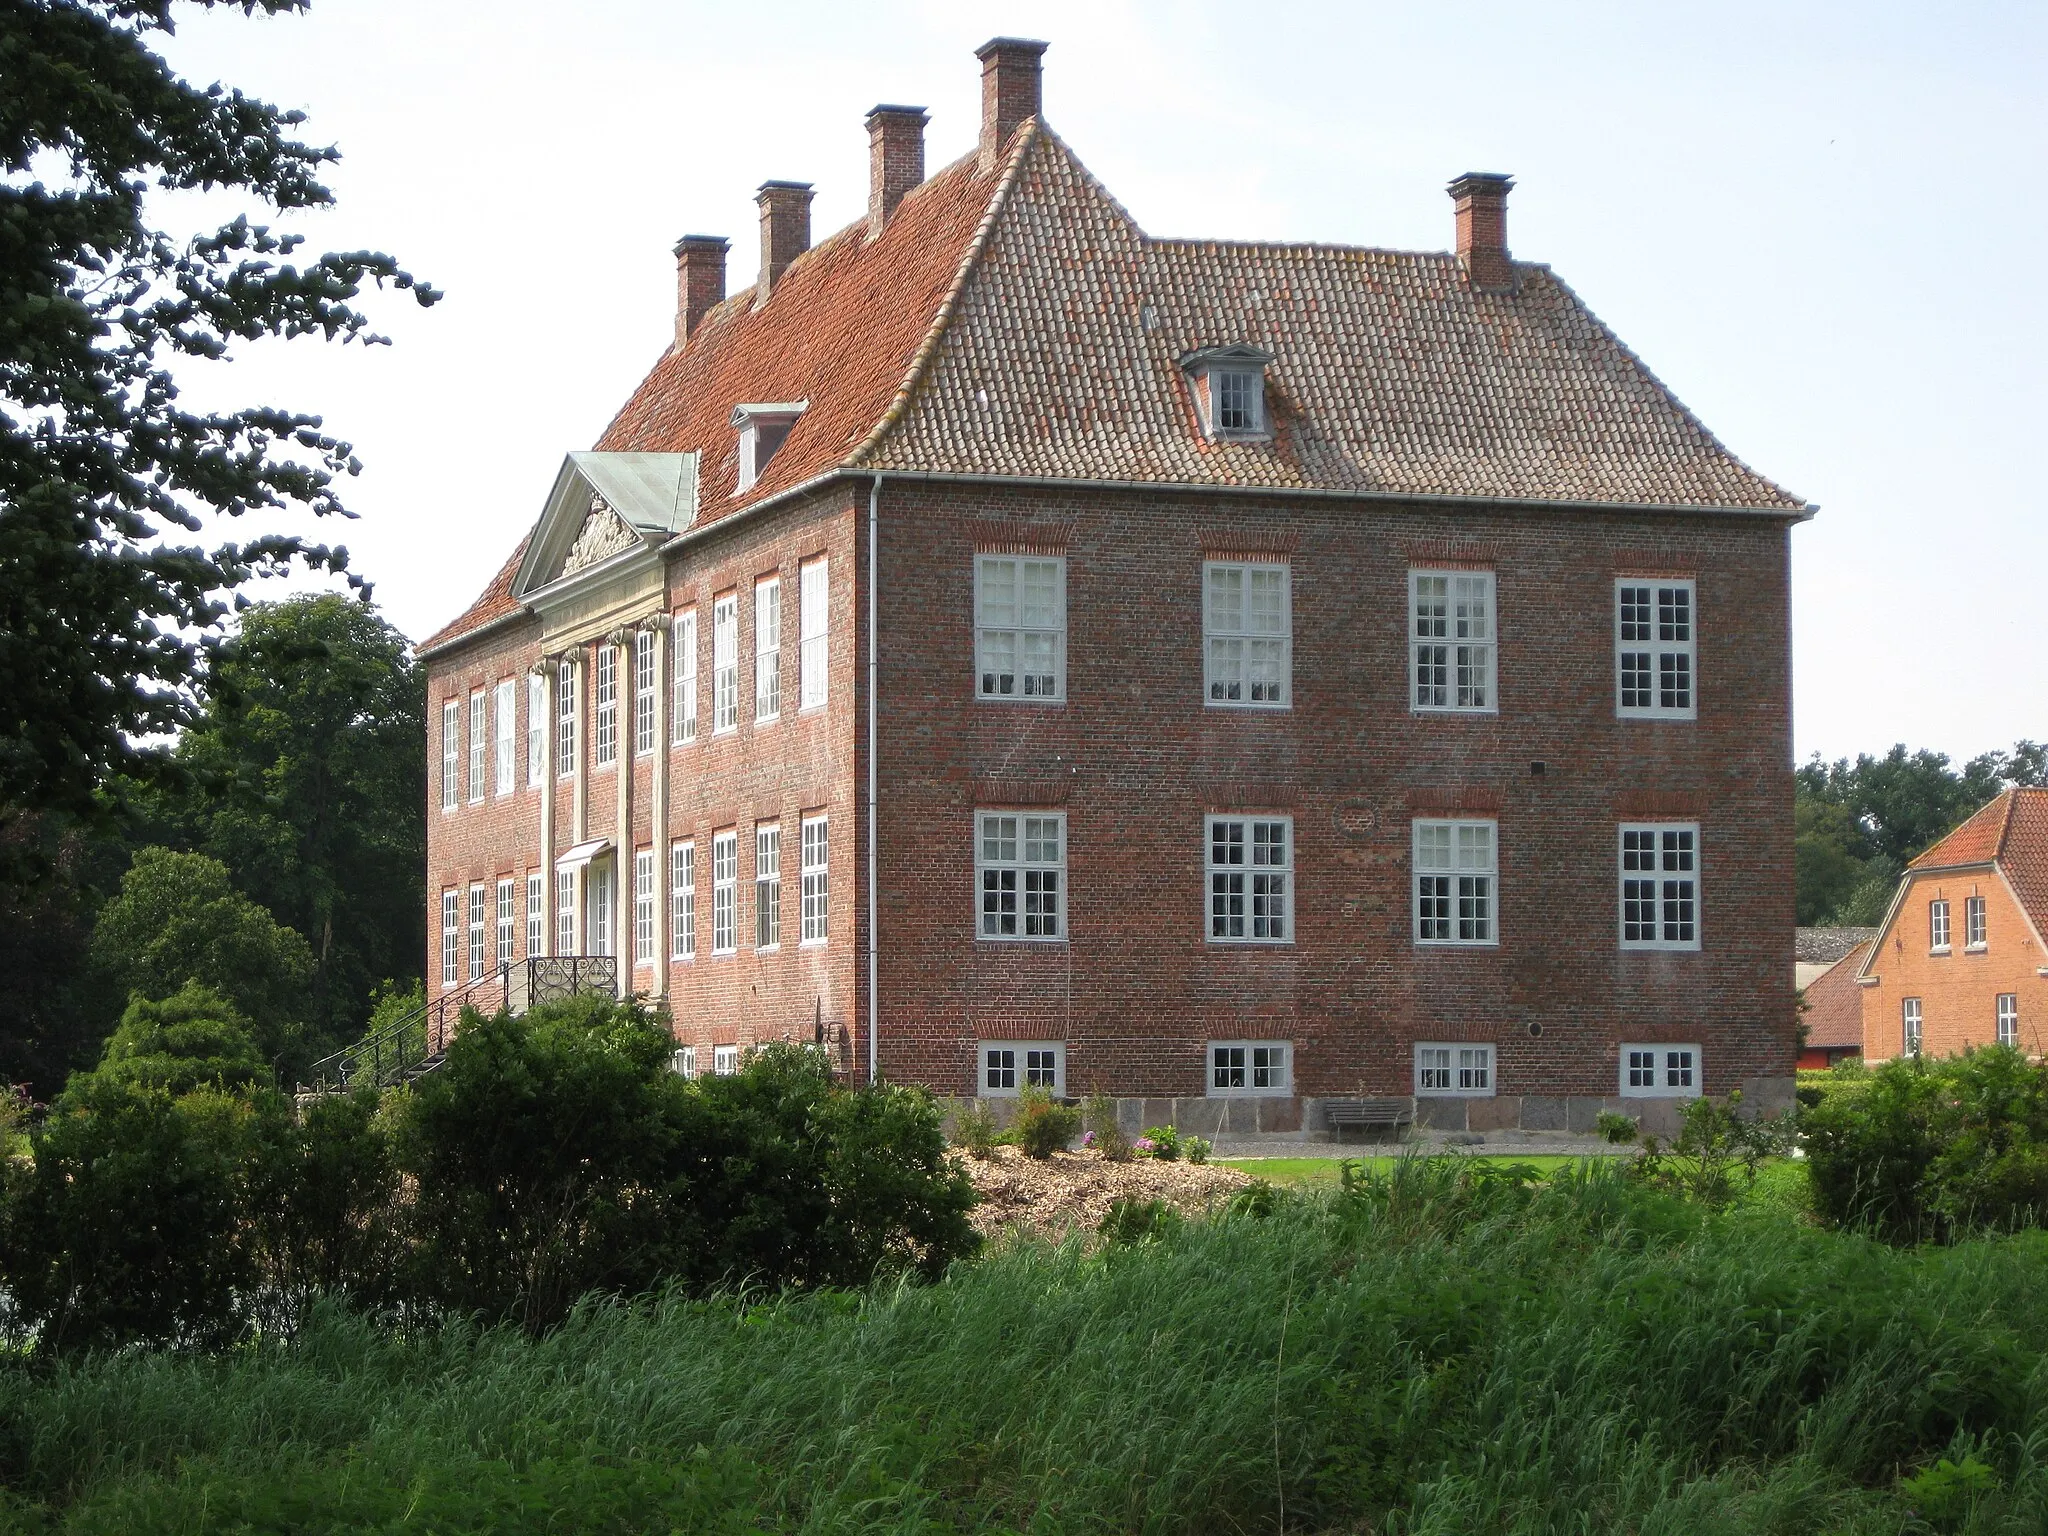 Photo showing: The estate "Nysø Slot" nearby the small town "Præstø". The place is located on South Zealand in east Denmark.